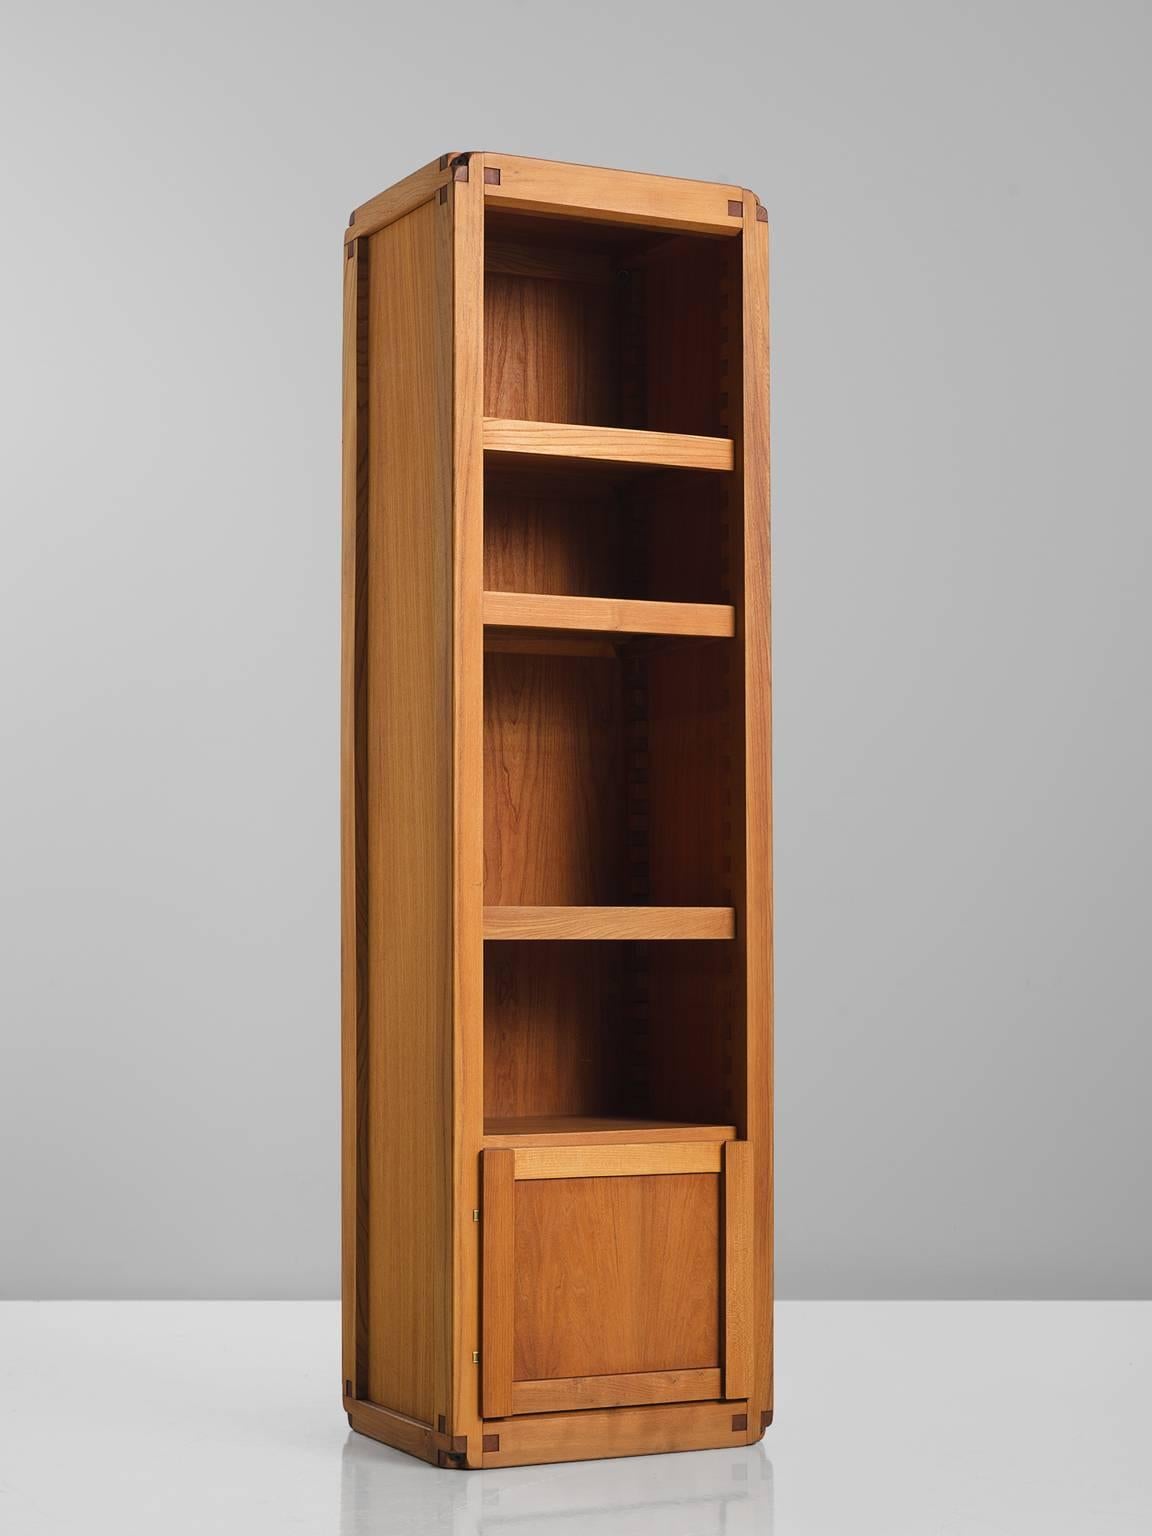 Pierre Chapo, cabinet B10, solid elm, France, 1960s. 

This bookcase or high cabinet is designed by the French designer Pierre Chapo. It is a piece of furniture that is modular and therefore could be designed according to the clients own wishes.